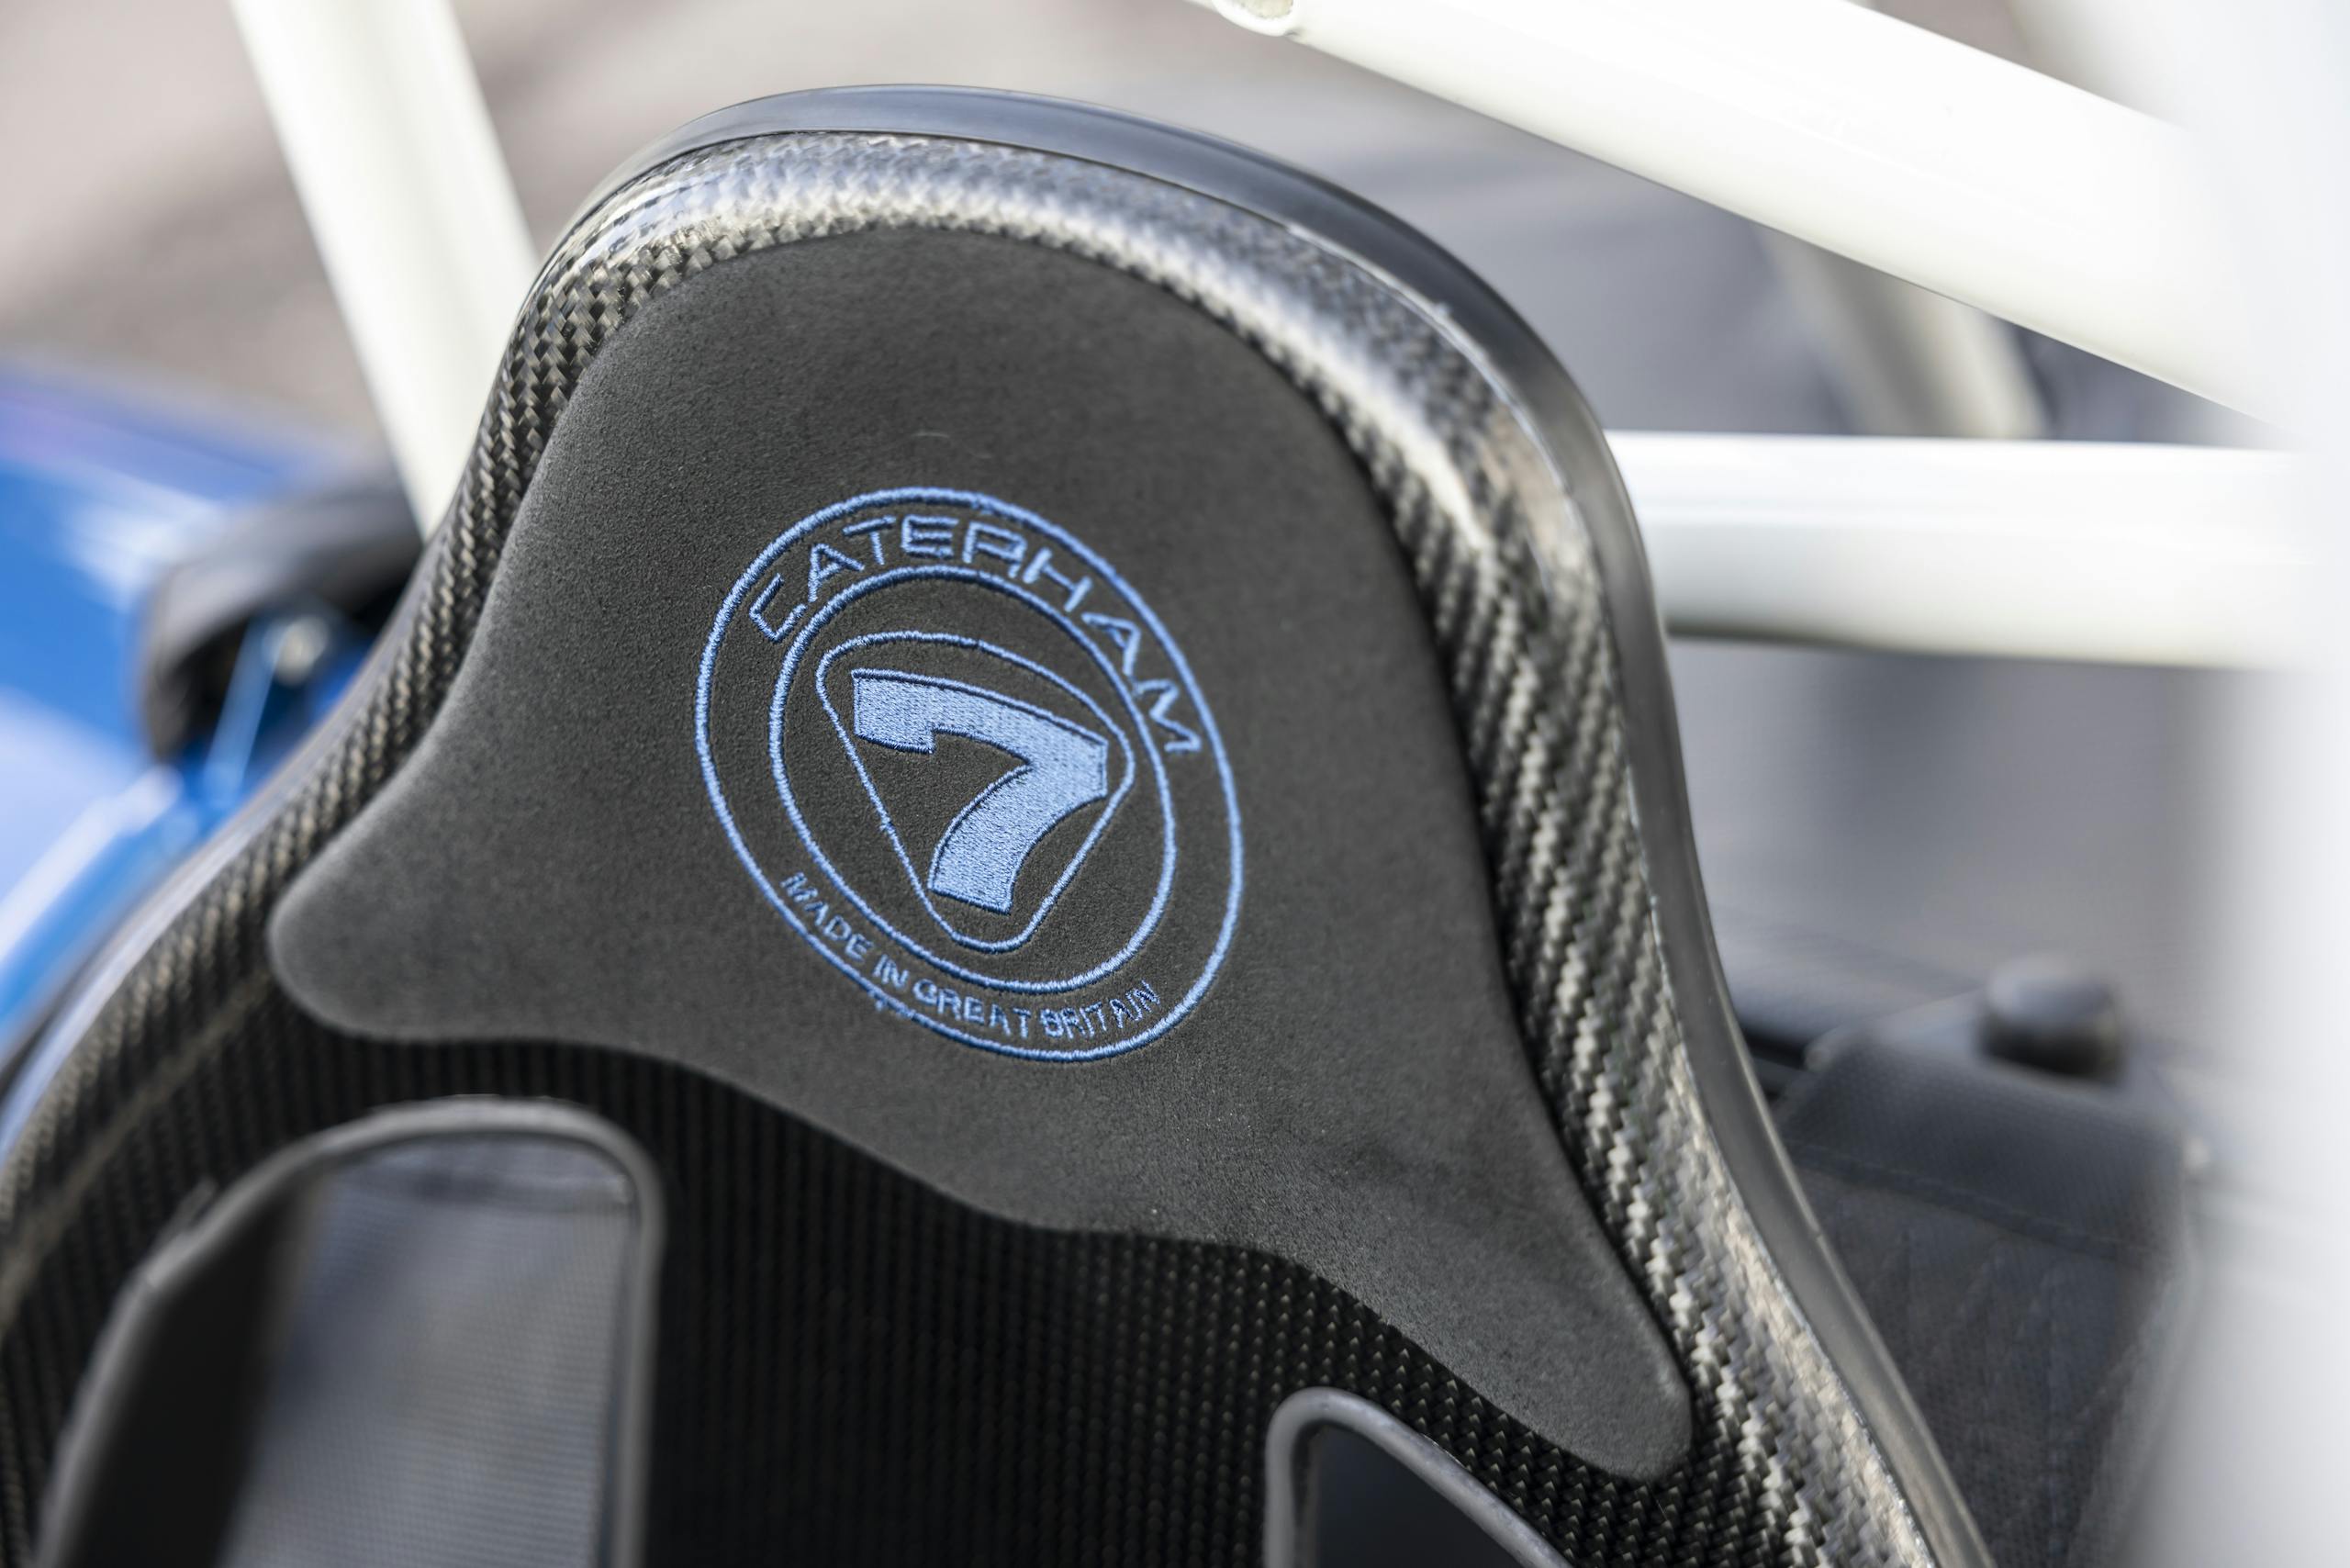 Caterham Cars driving action pan seat headrest embroidery detail